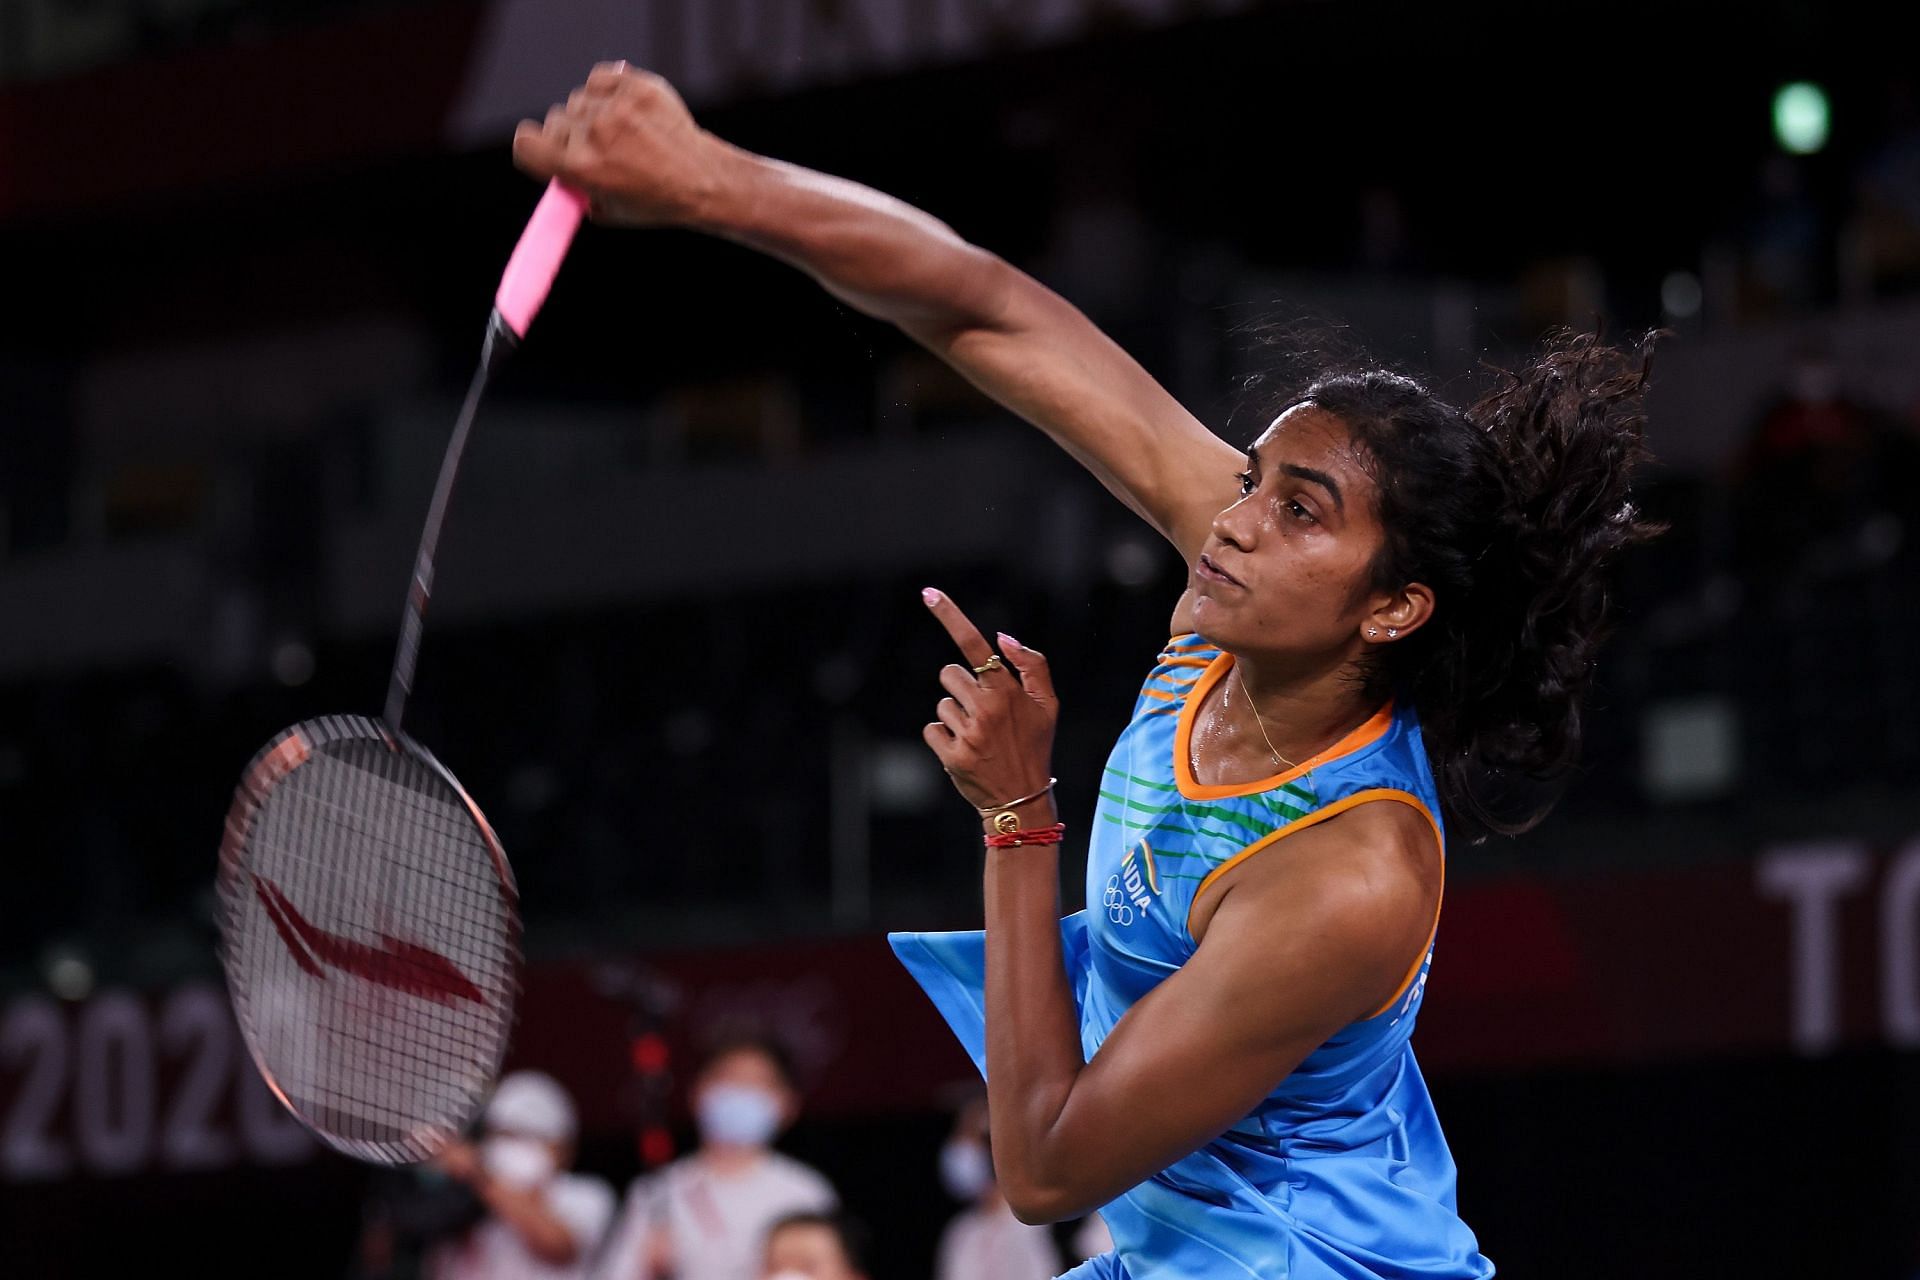 PV Sindhu in action at the Tokyo Olympics.